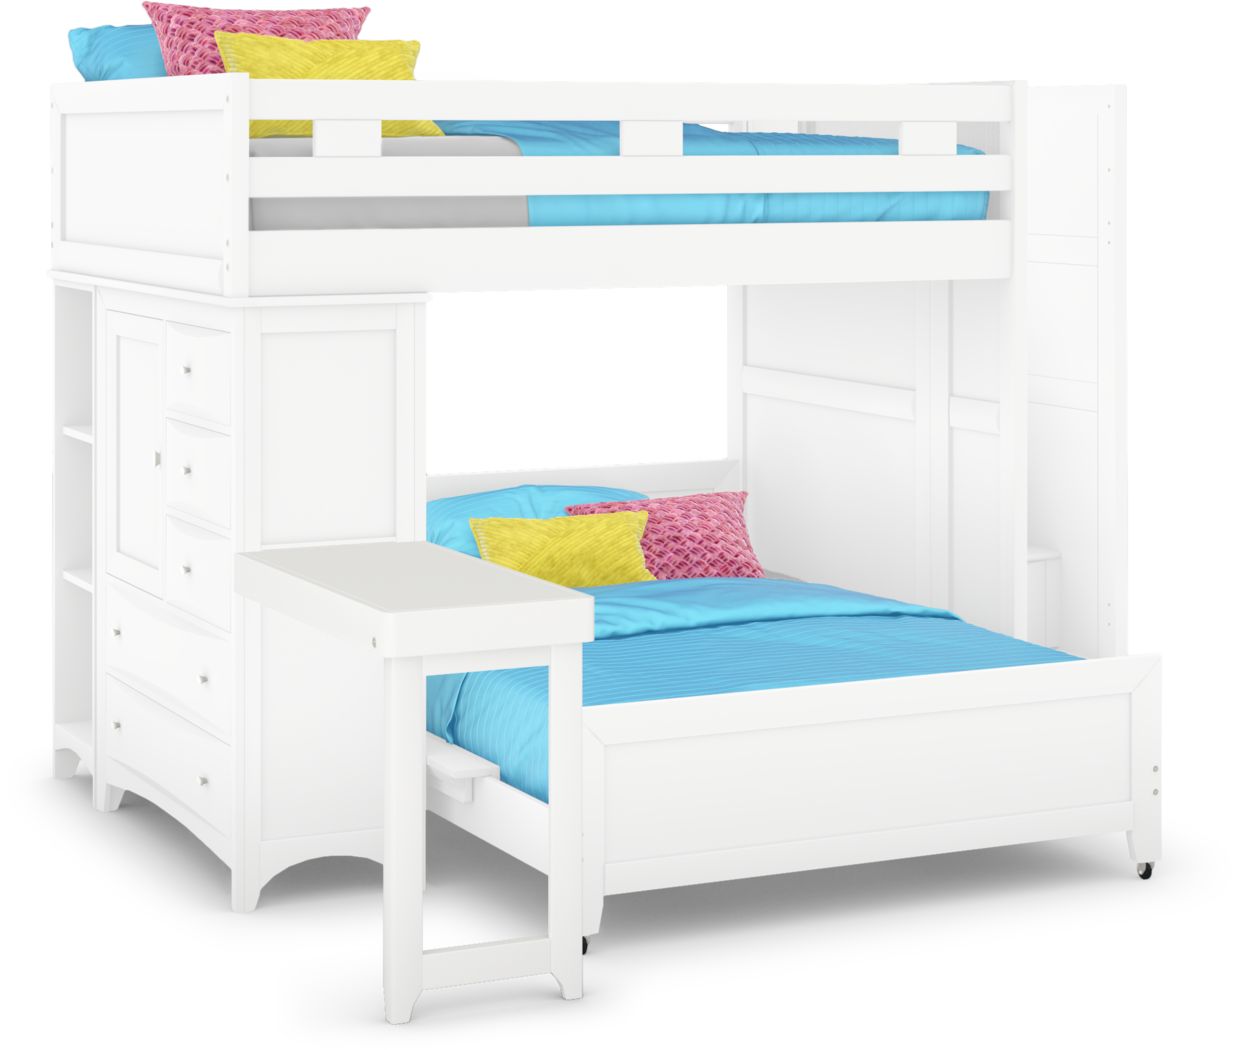 Step Bunk With Chest Desk Attachment, Ivy League Bunk Bed Rooms To Go